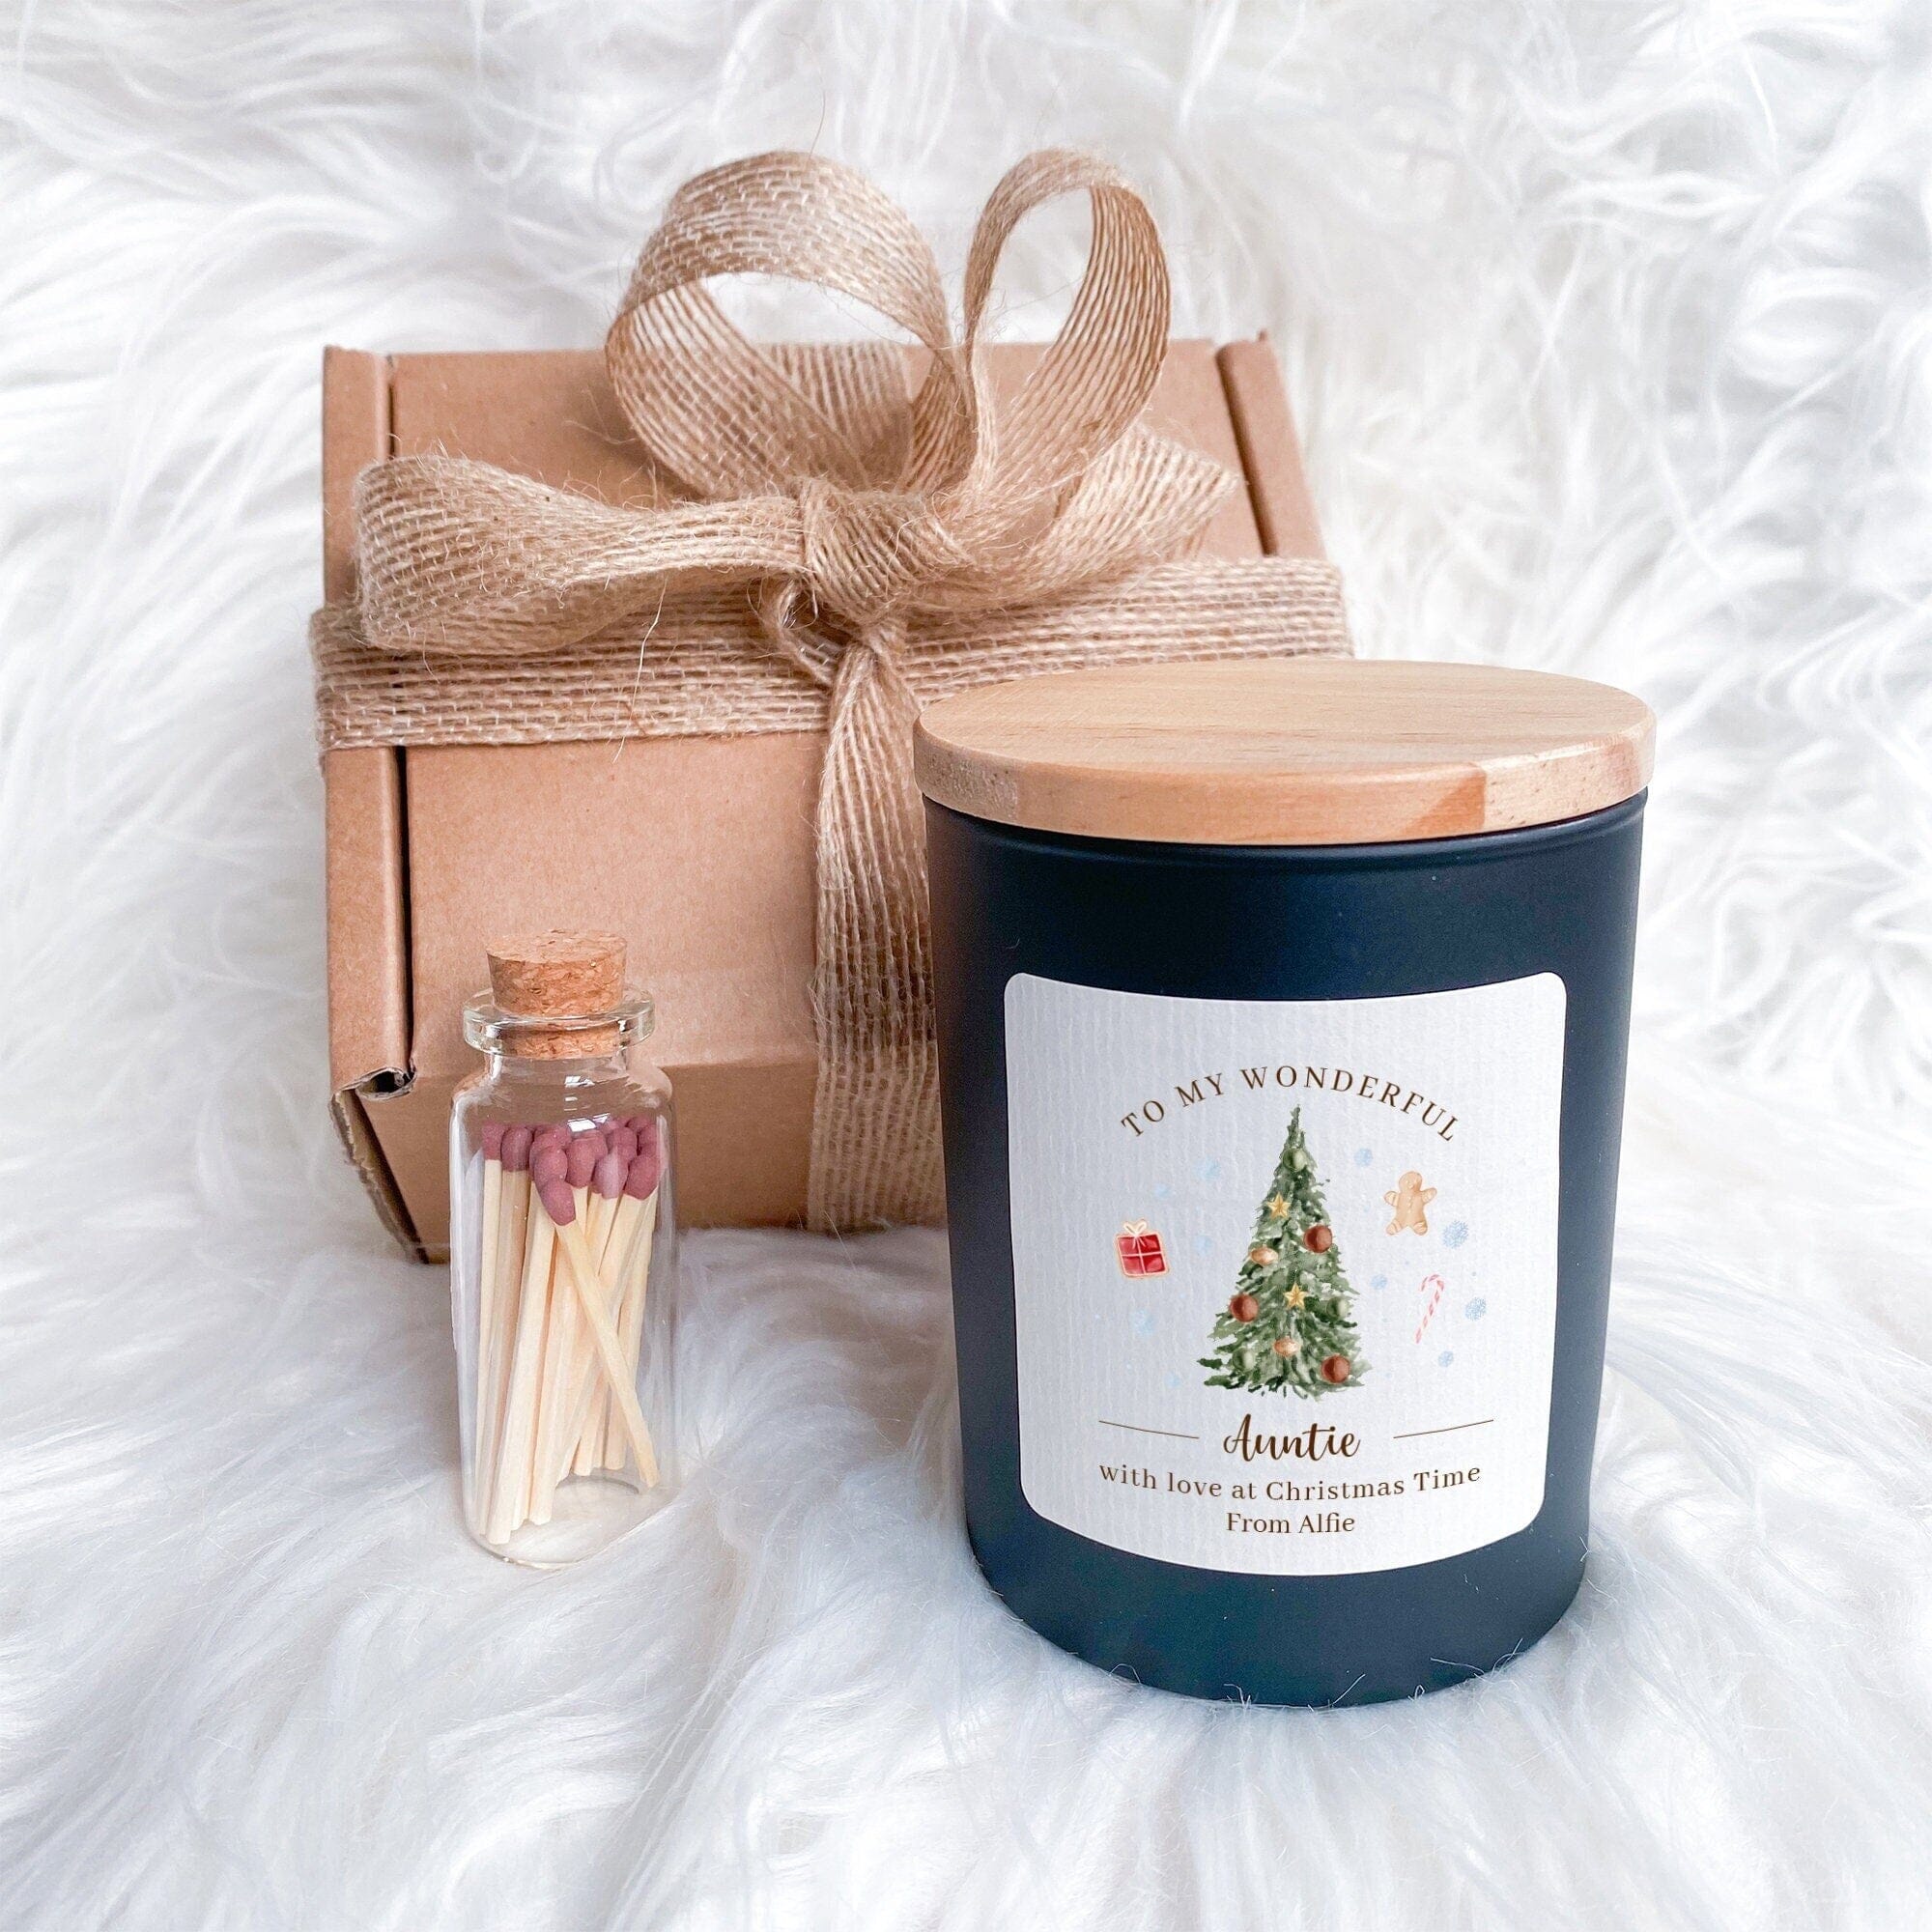 Personalised Scented Candle Christmas Gift for Sister, Gift Box for Her, Merry Christmas Cosy Stylish Xmas Present